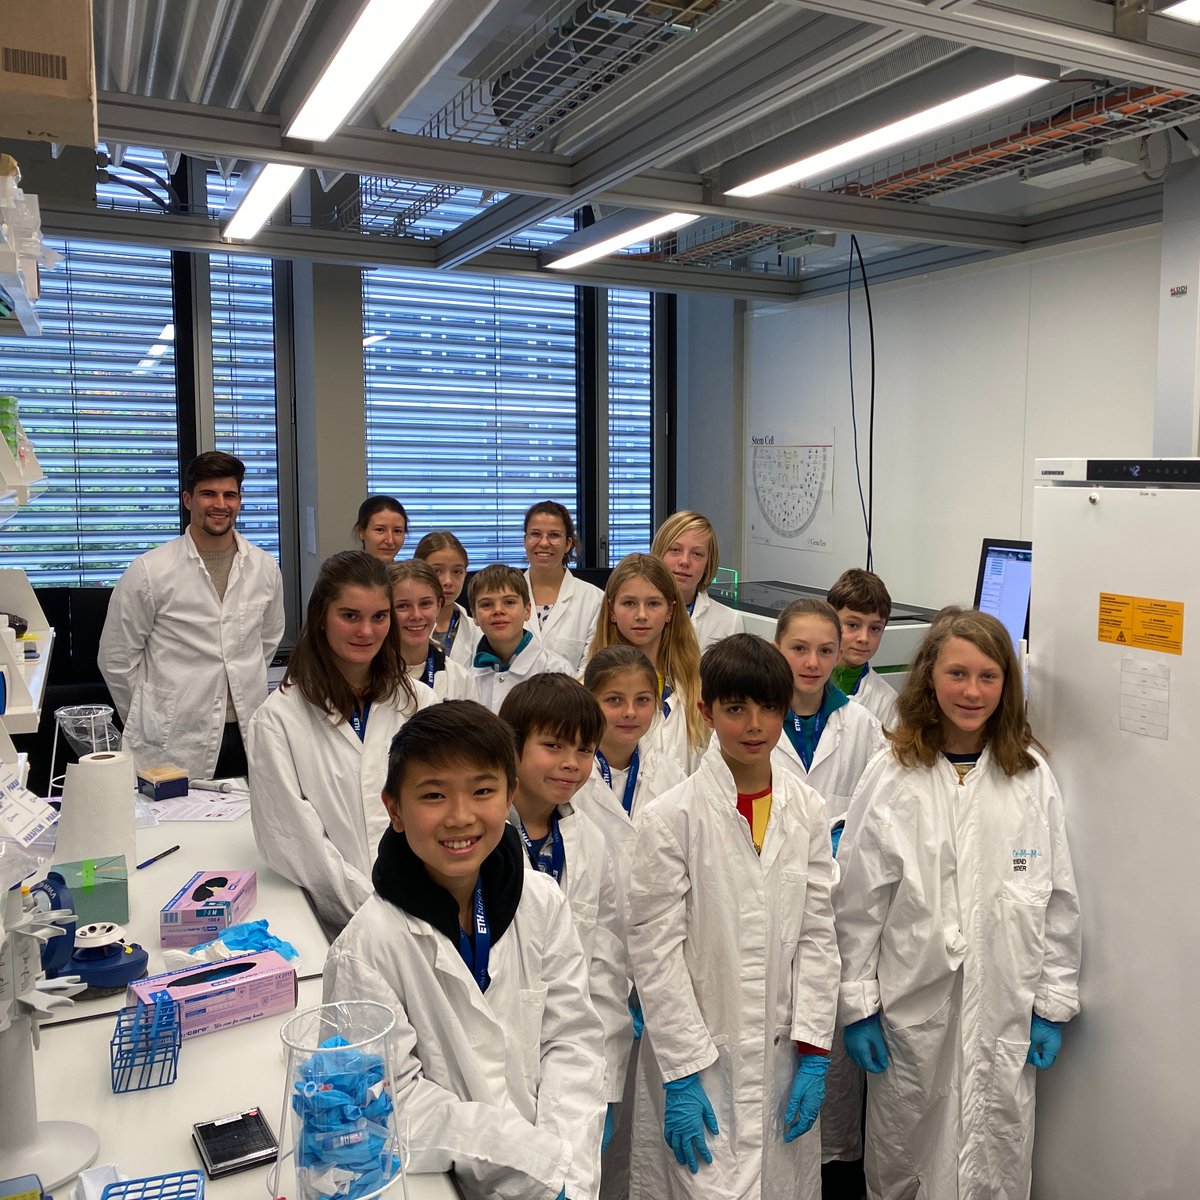 Happy to have introduced a new generation of #YoungScientists to the world of high-content imaging of #PrimaryCells as part of #Zukunftstag. The program was inspired by our most recent publication studying #ImmuneCell heterogeneity. 👩‍🔬👨‍🔬🔬 @ETH